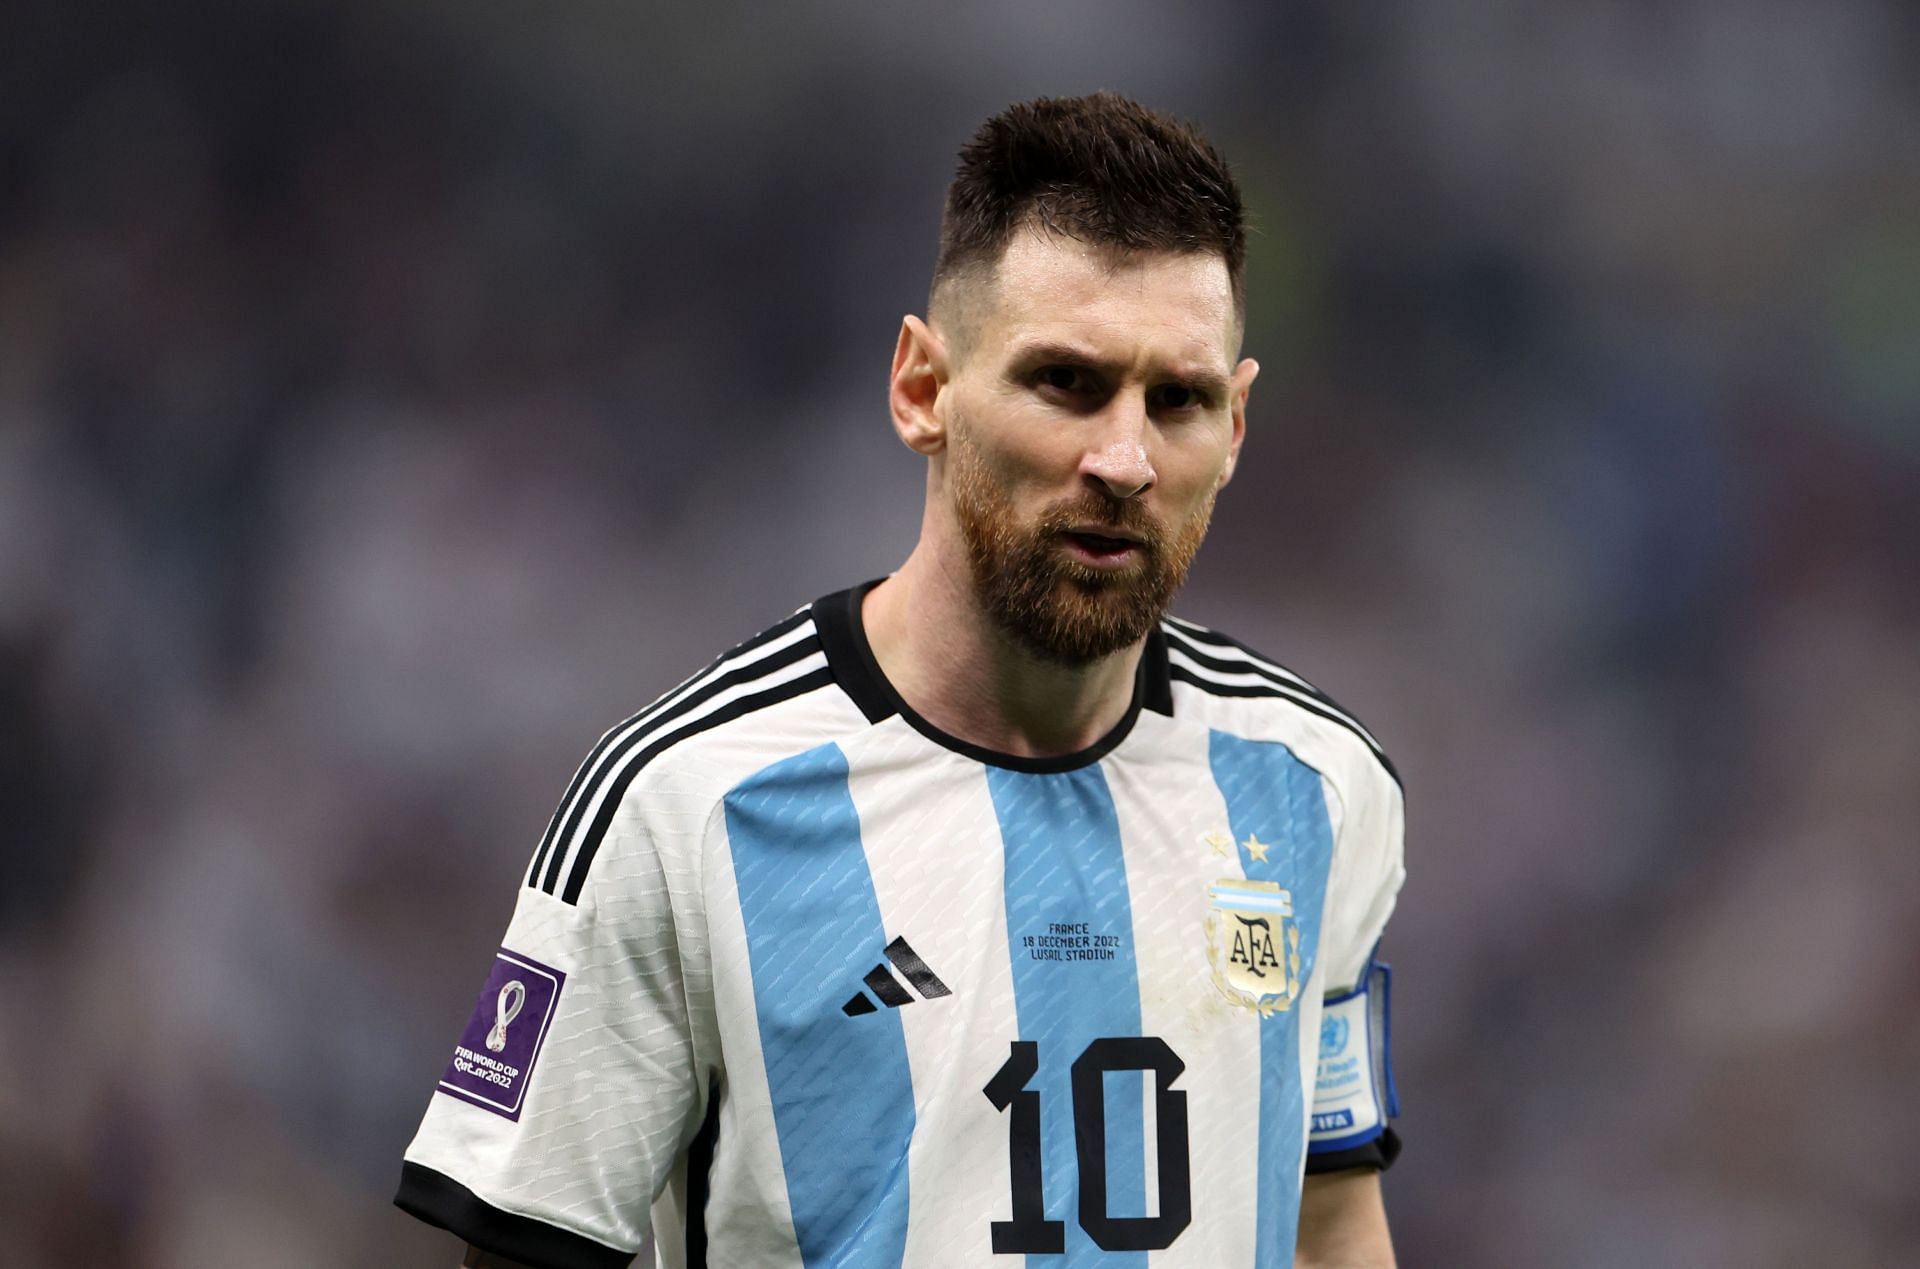 Lionel Messi enjoyed a brilliant 2022 with club and country.